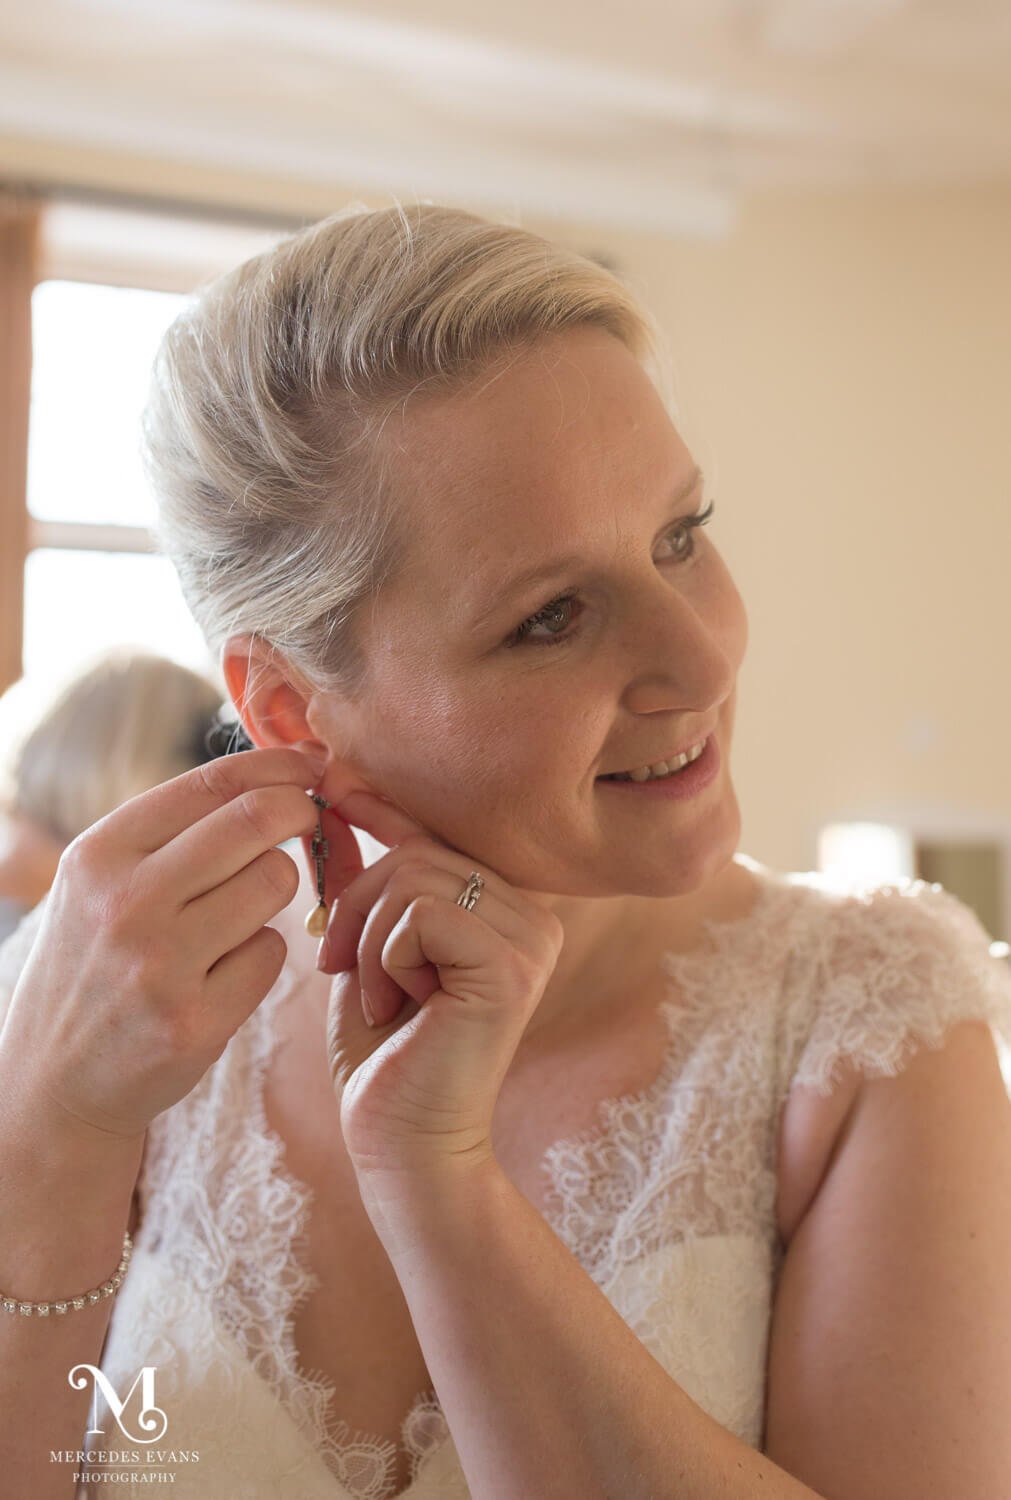 The bride puts on her earrings at the Elvetham